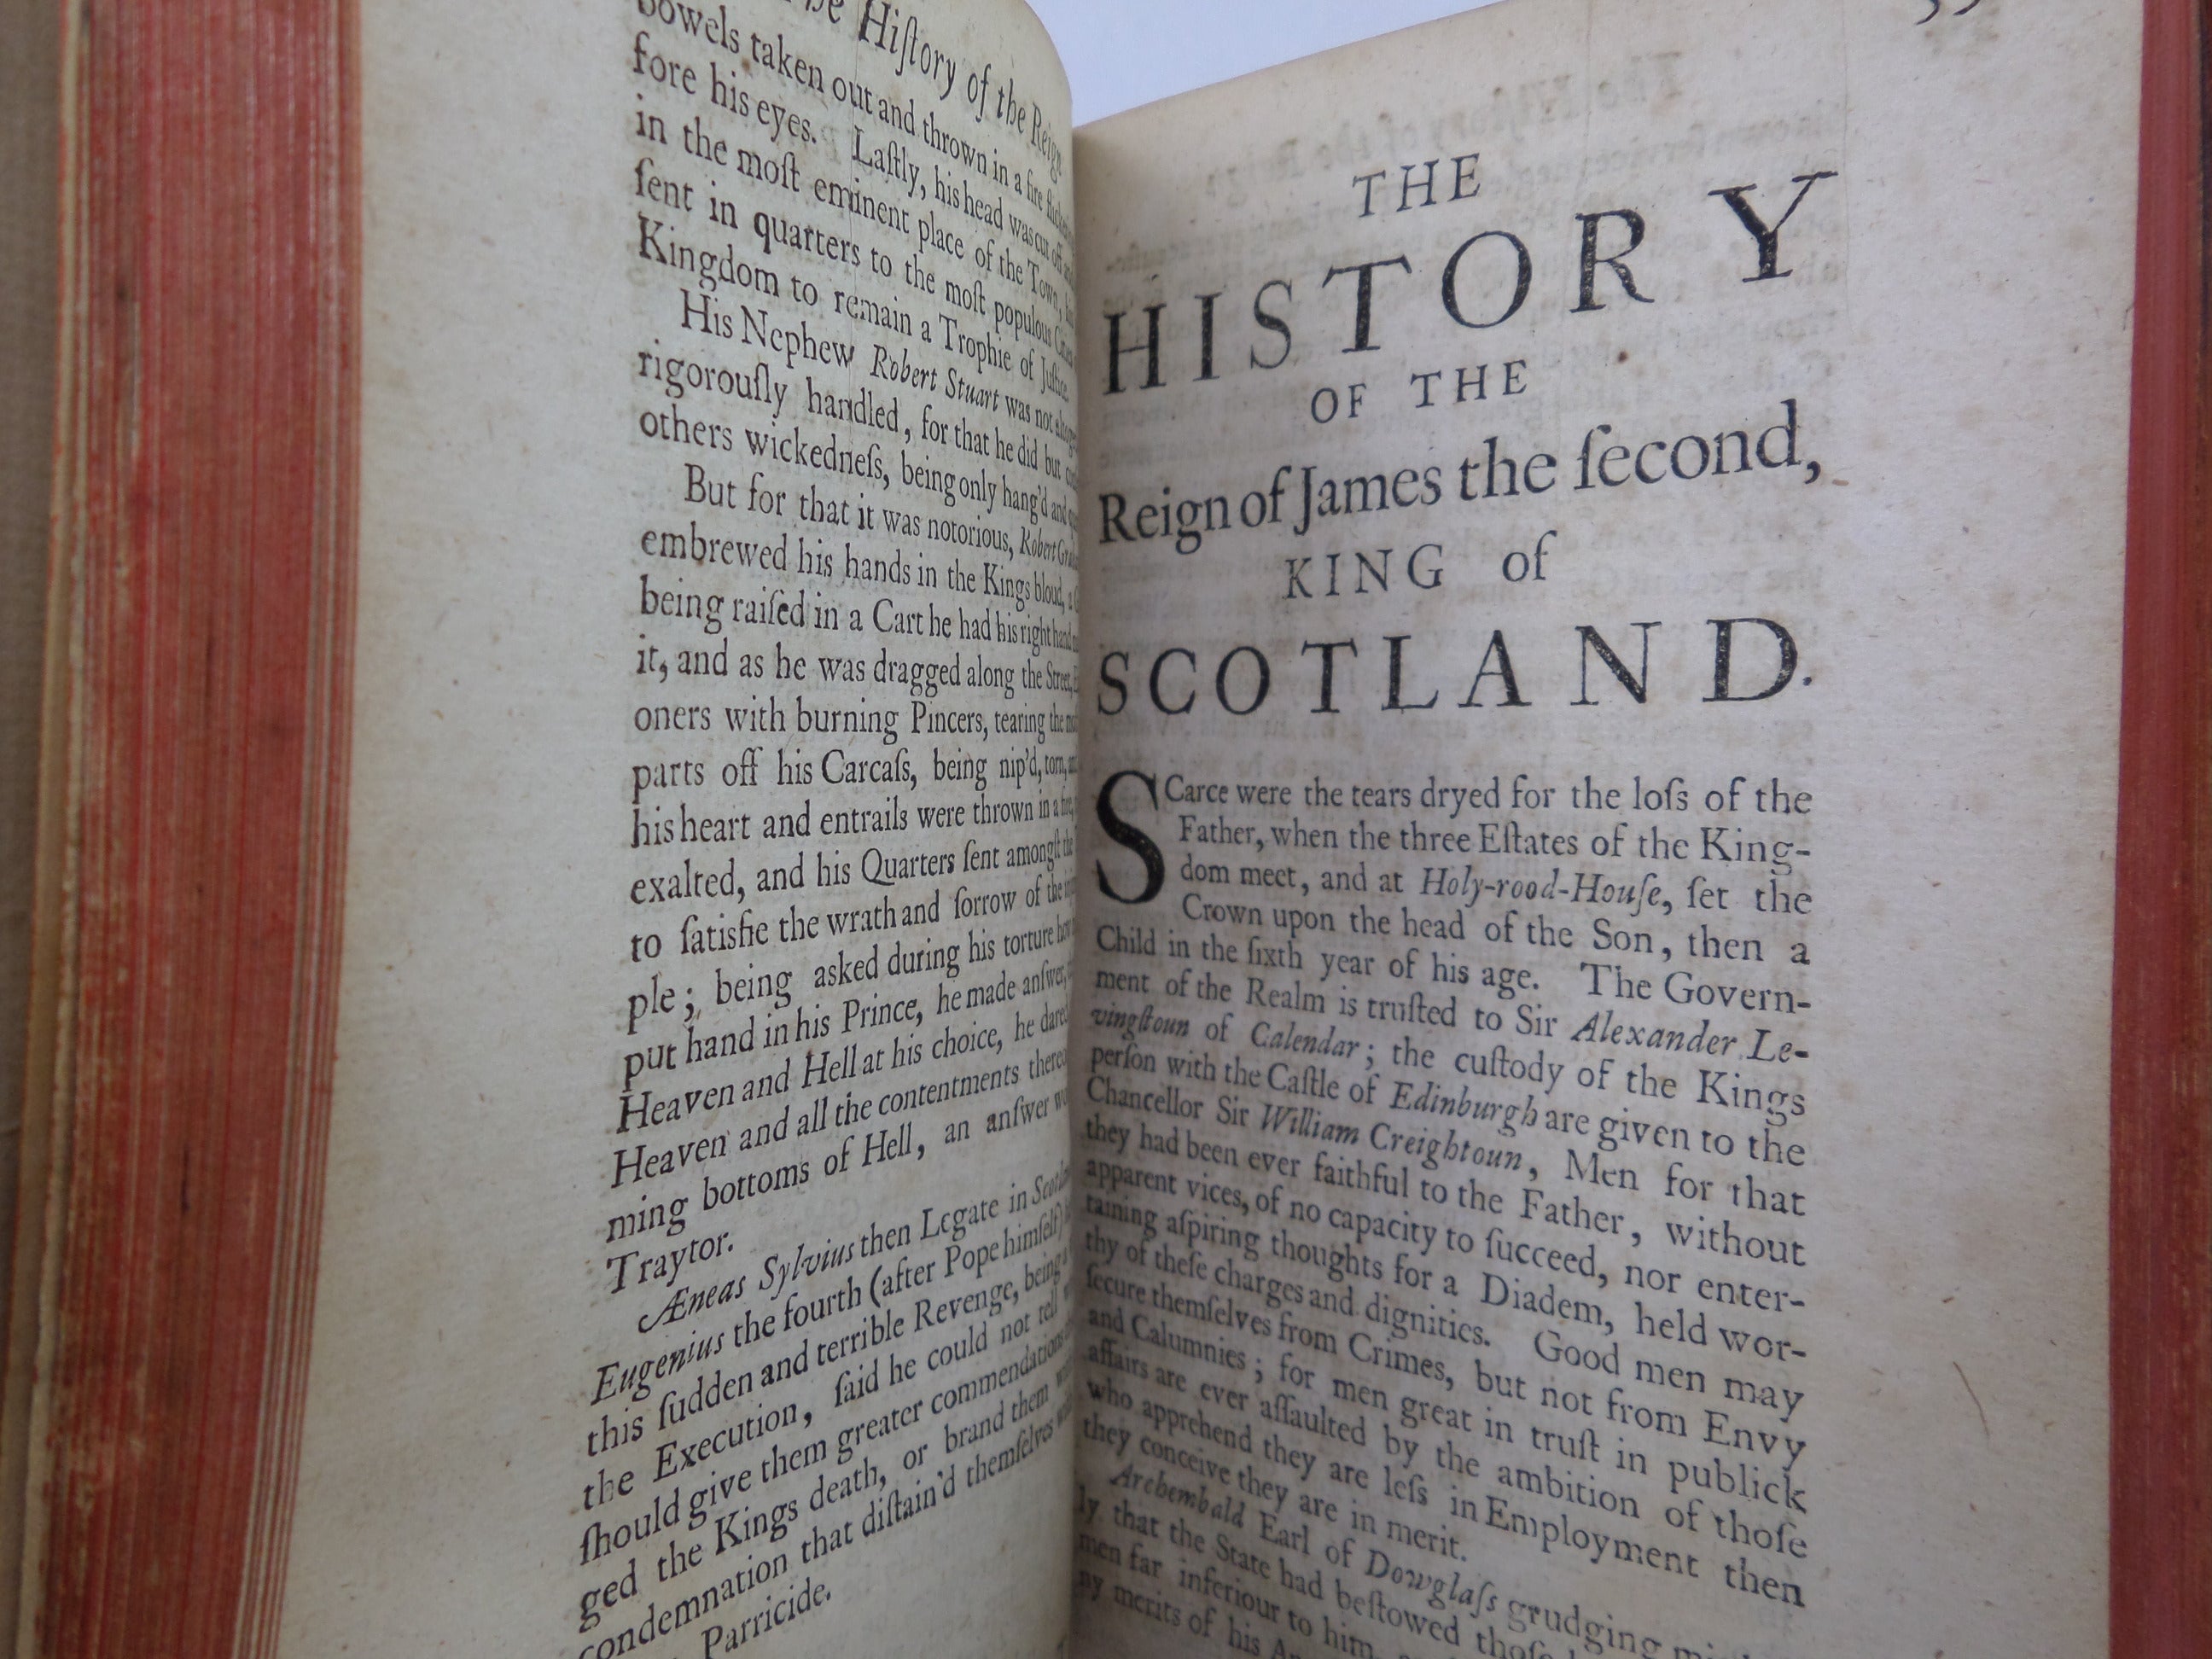 THE HISTORY OF SCOTLAND BY WILLIAM DRUMMOND 1681 FINE LEATHER BINDING